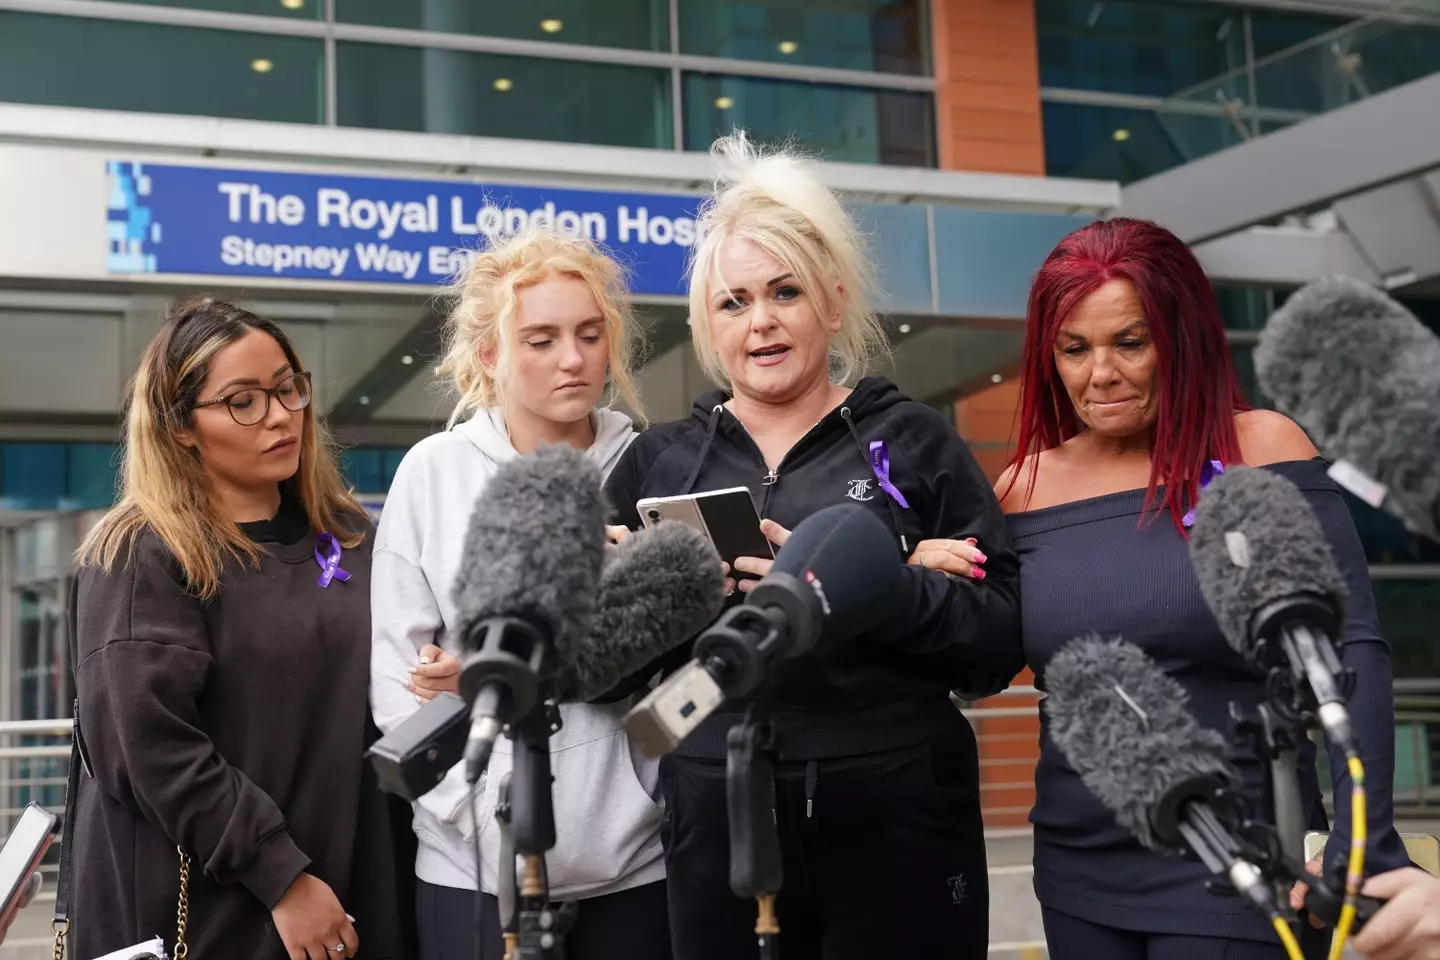 Doctors at Royal London Hospital say continuing treatment isn't in Archie's best interests.